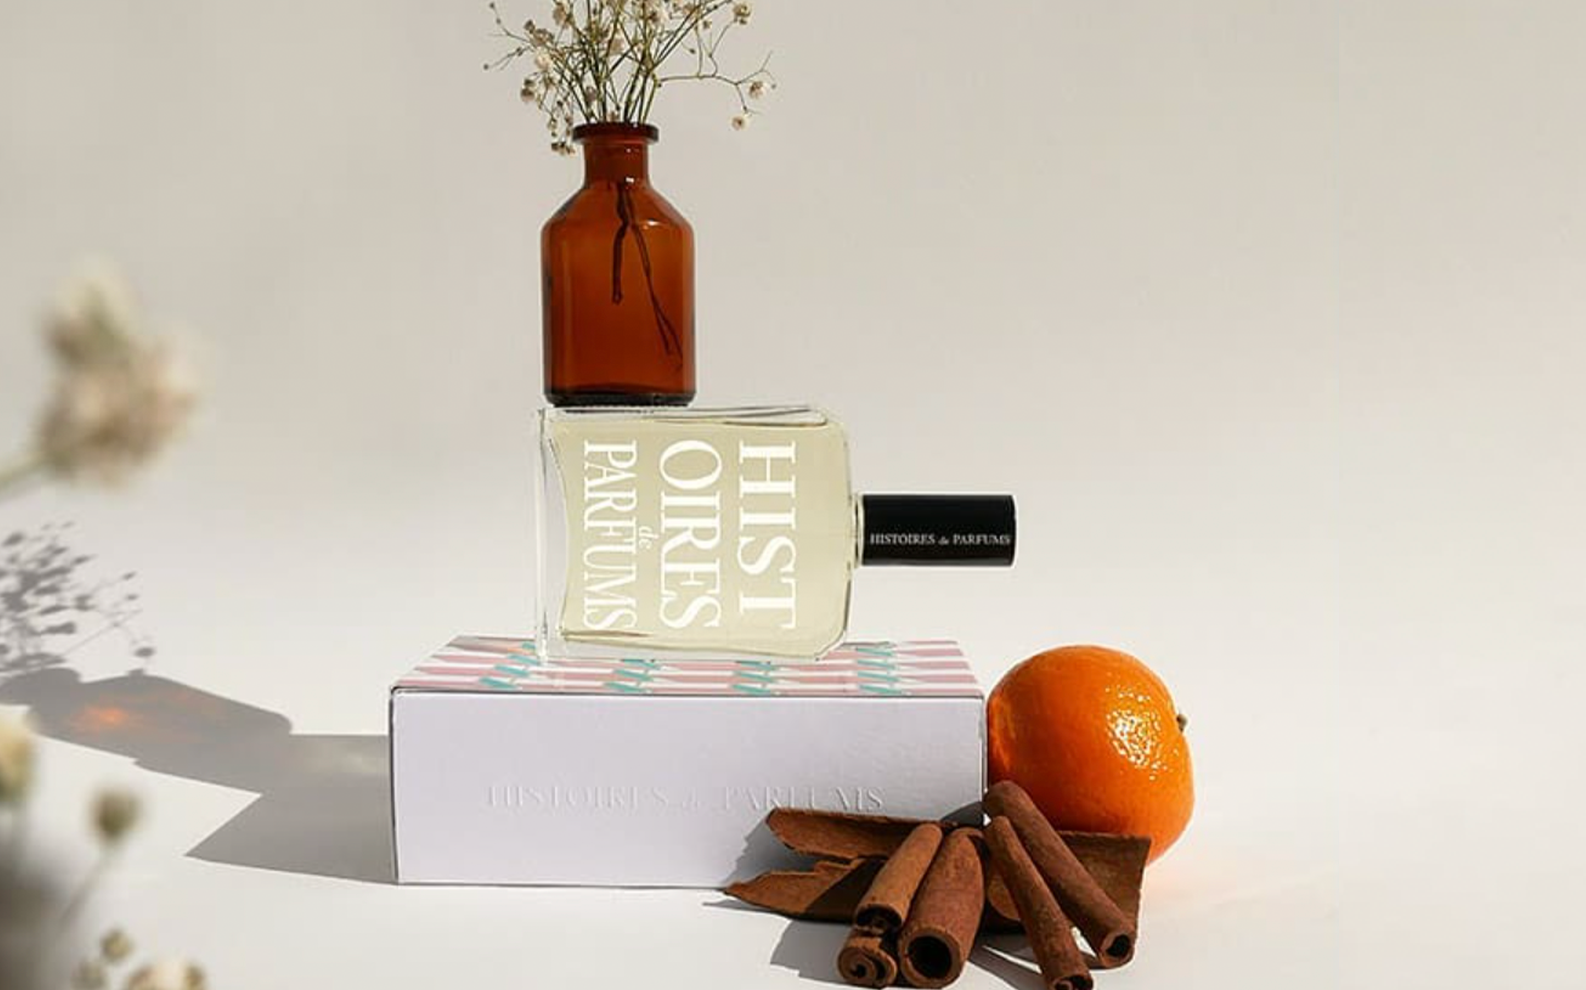 Chocolate, Candy, Cookies: A Story of Sweet Perfumes